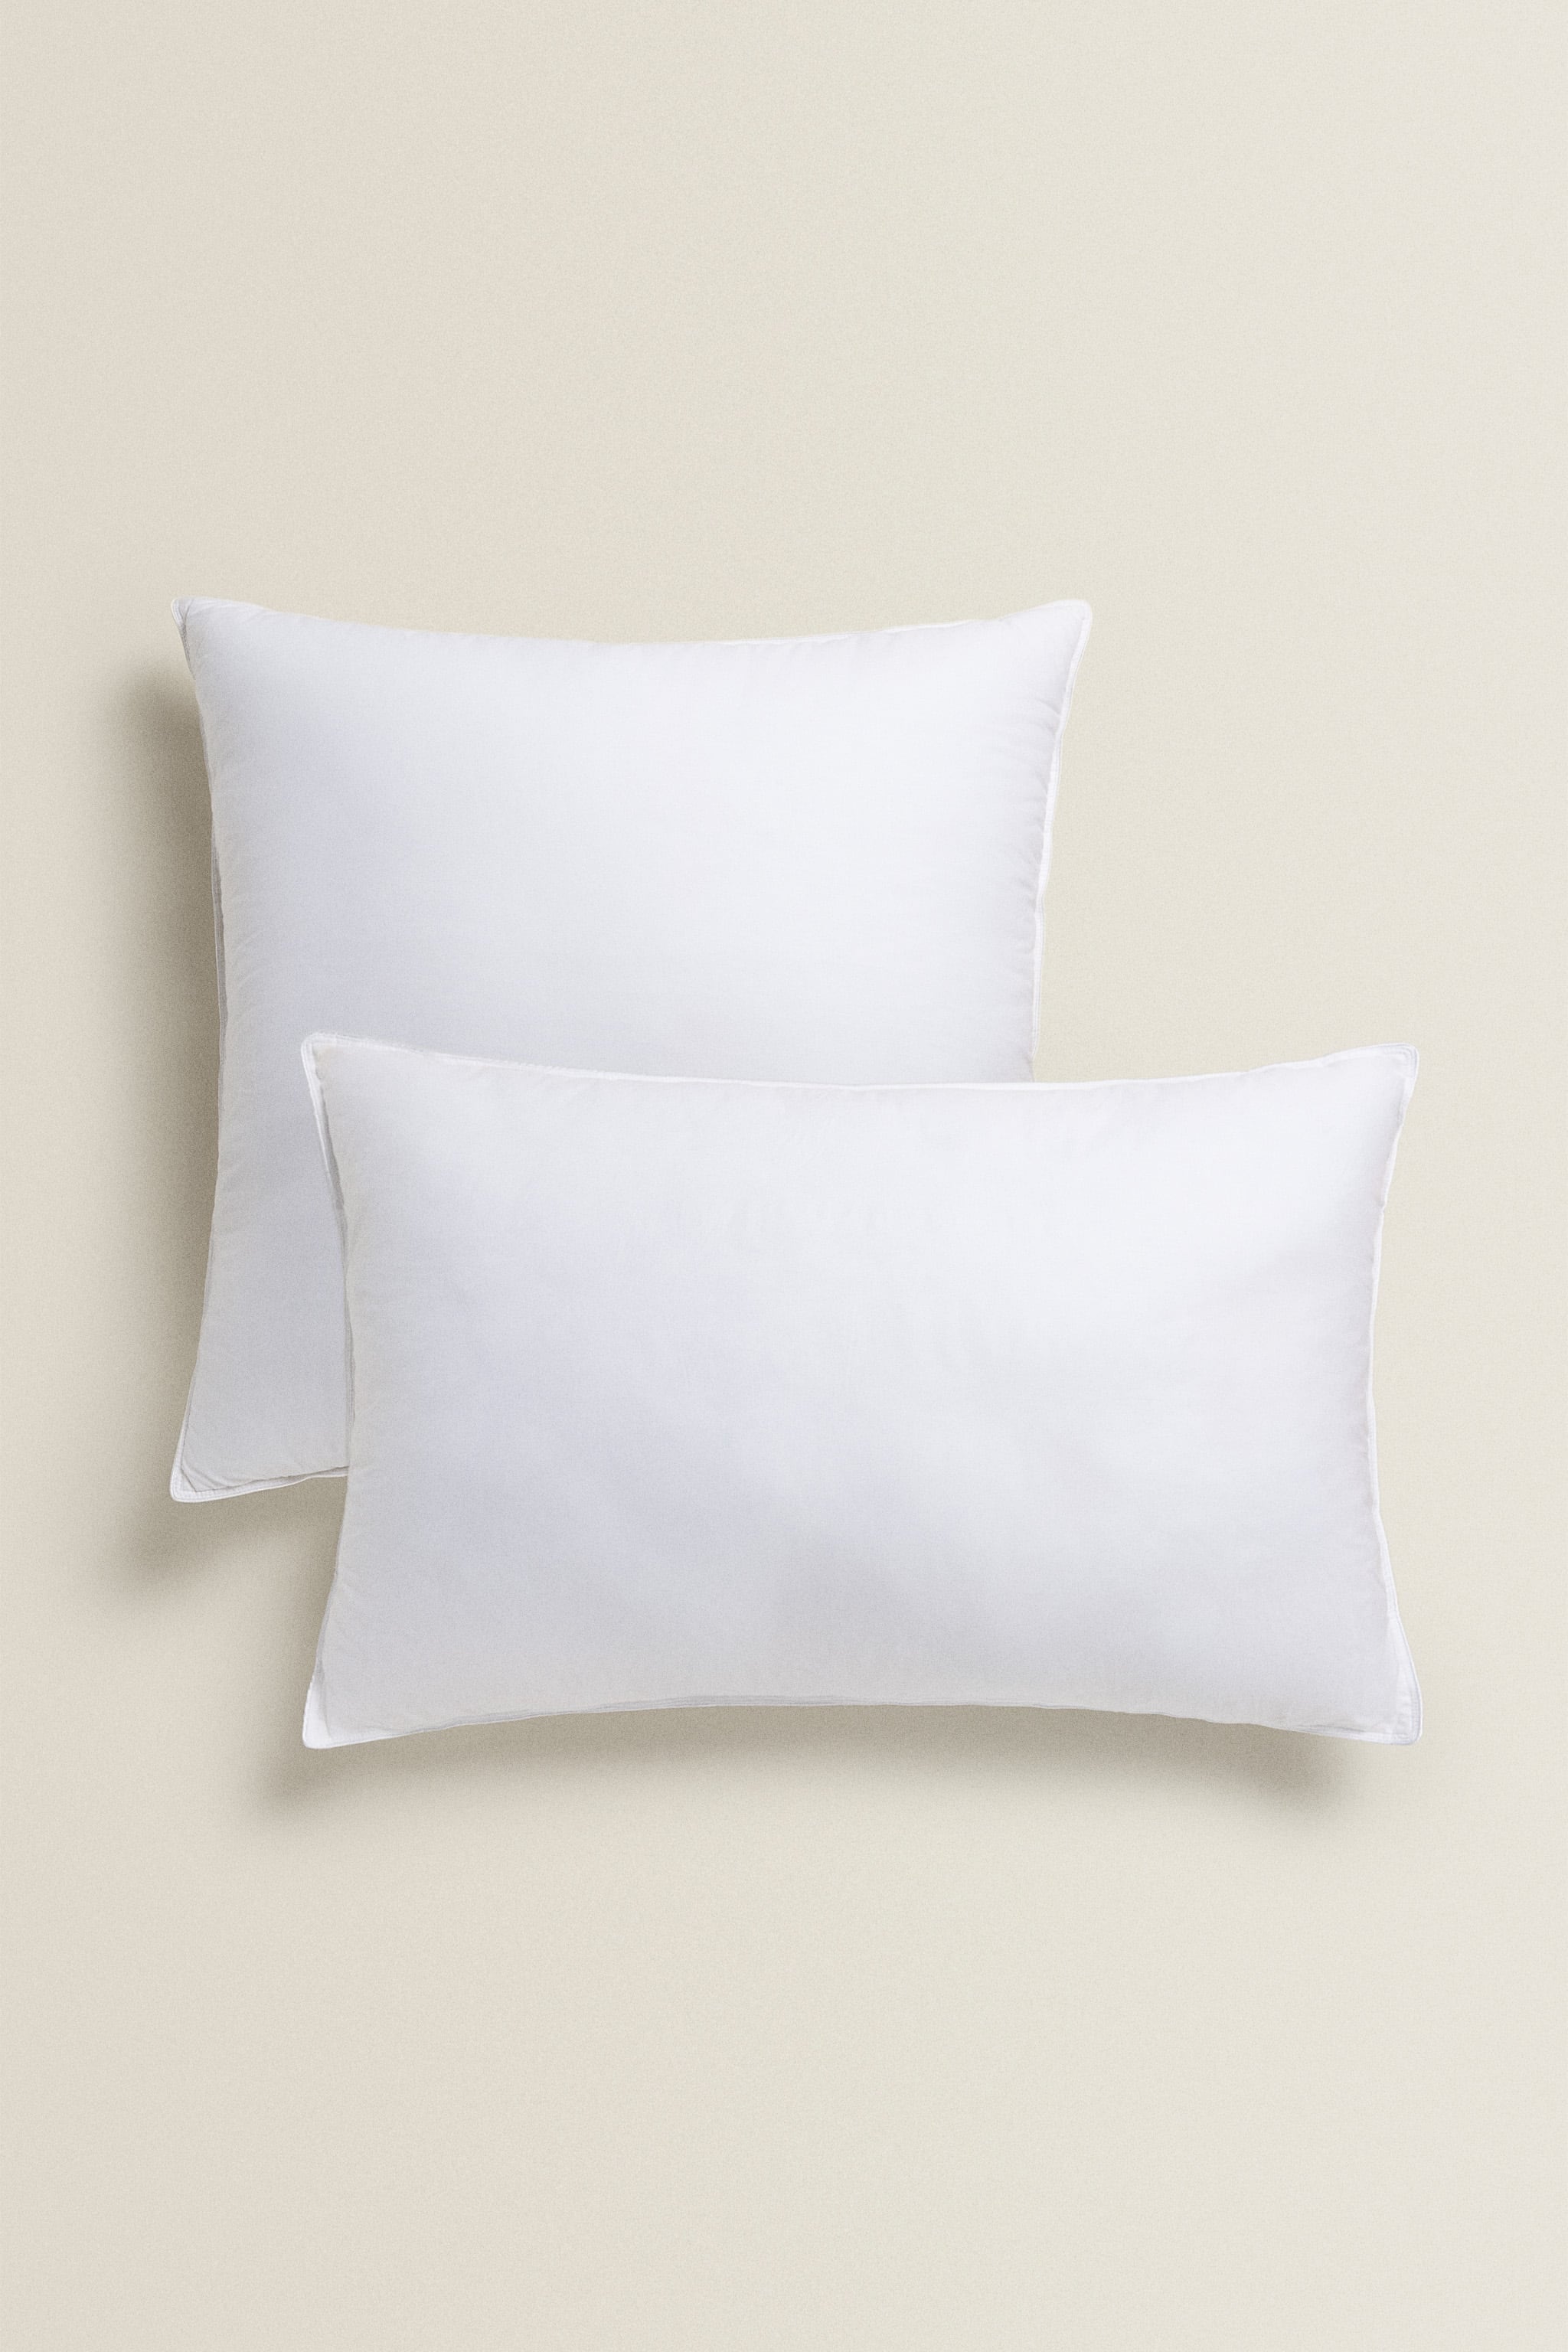 3 CHAMBER FEATHER PILLOW